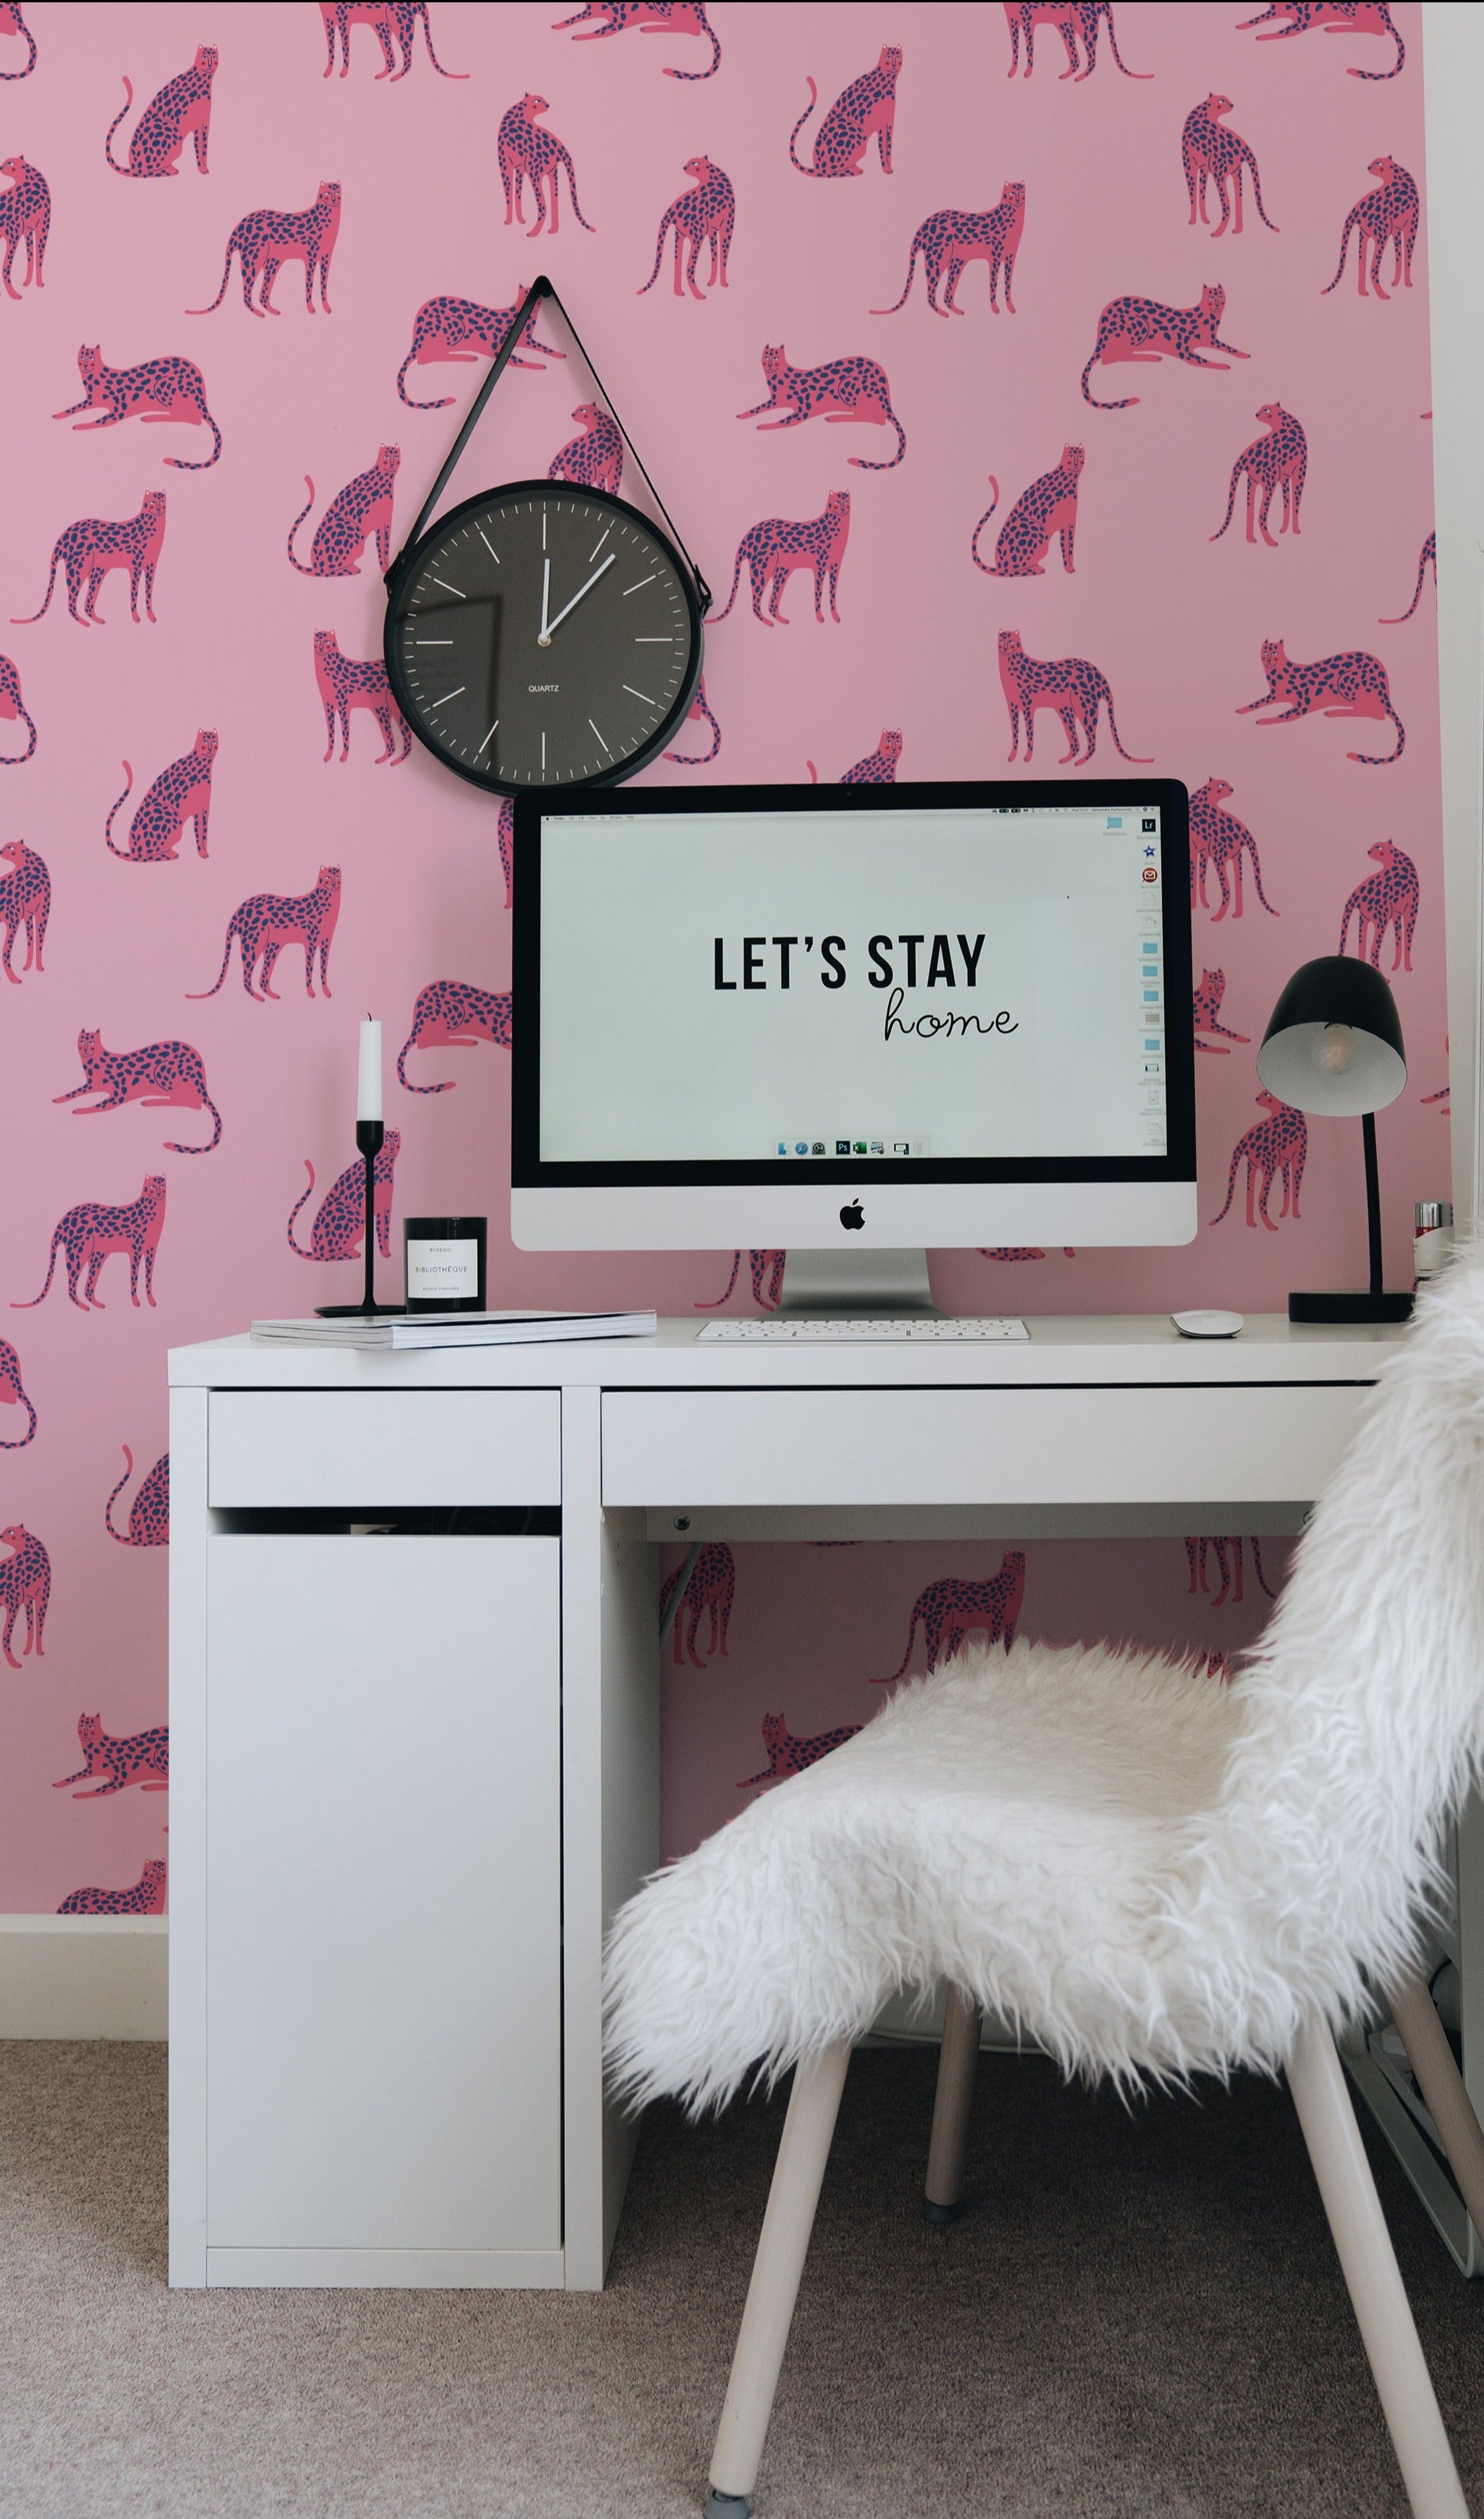 A chic home office decorated with Pink Leopard wallpaper, featuring pink and blue leopard illustrations on a pink background. The workspace includes a white desk, a fluffy chair, a clock, and a computer screen displaying 'Let's Stay Home'.